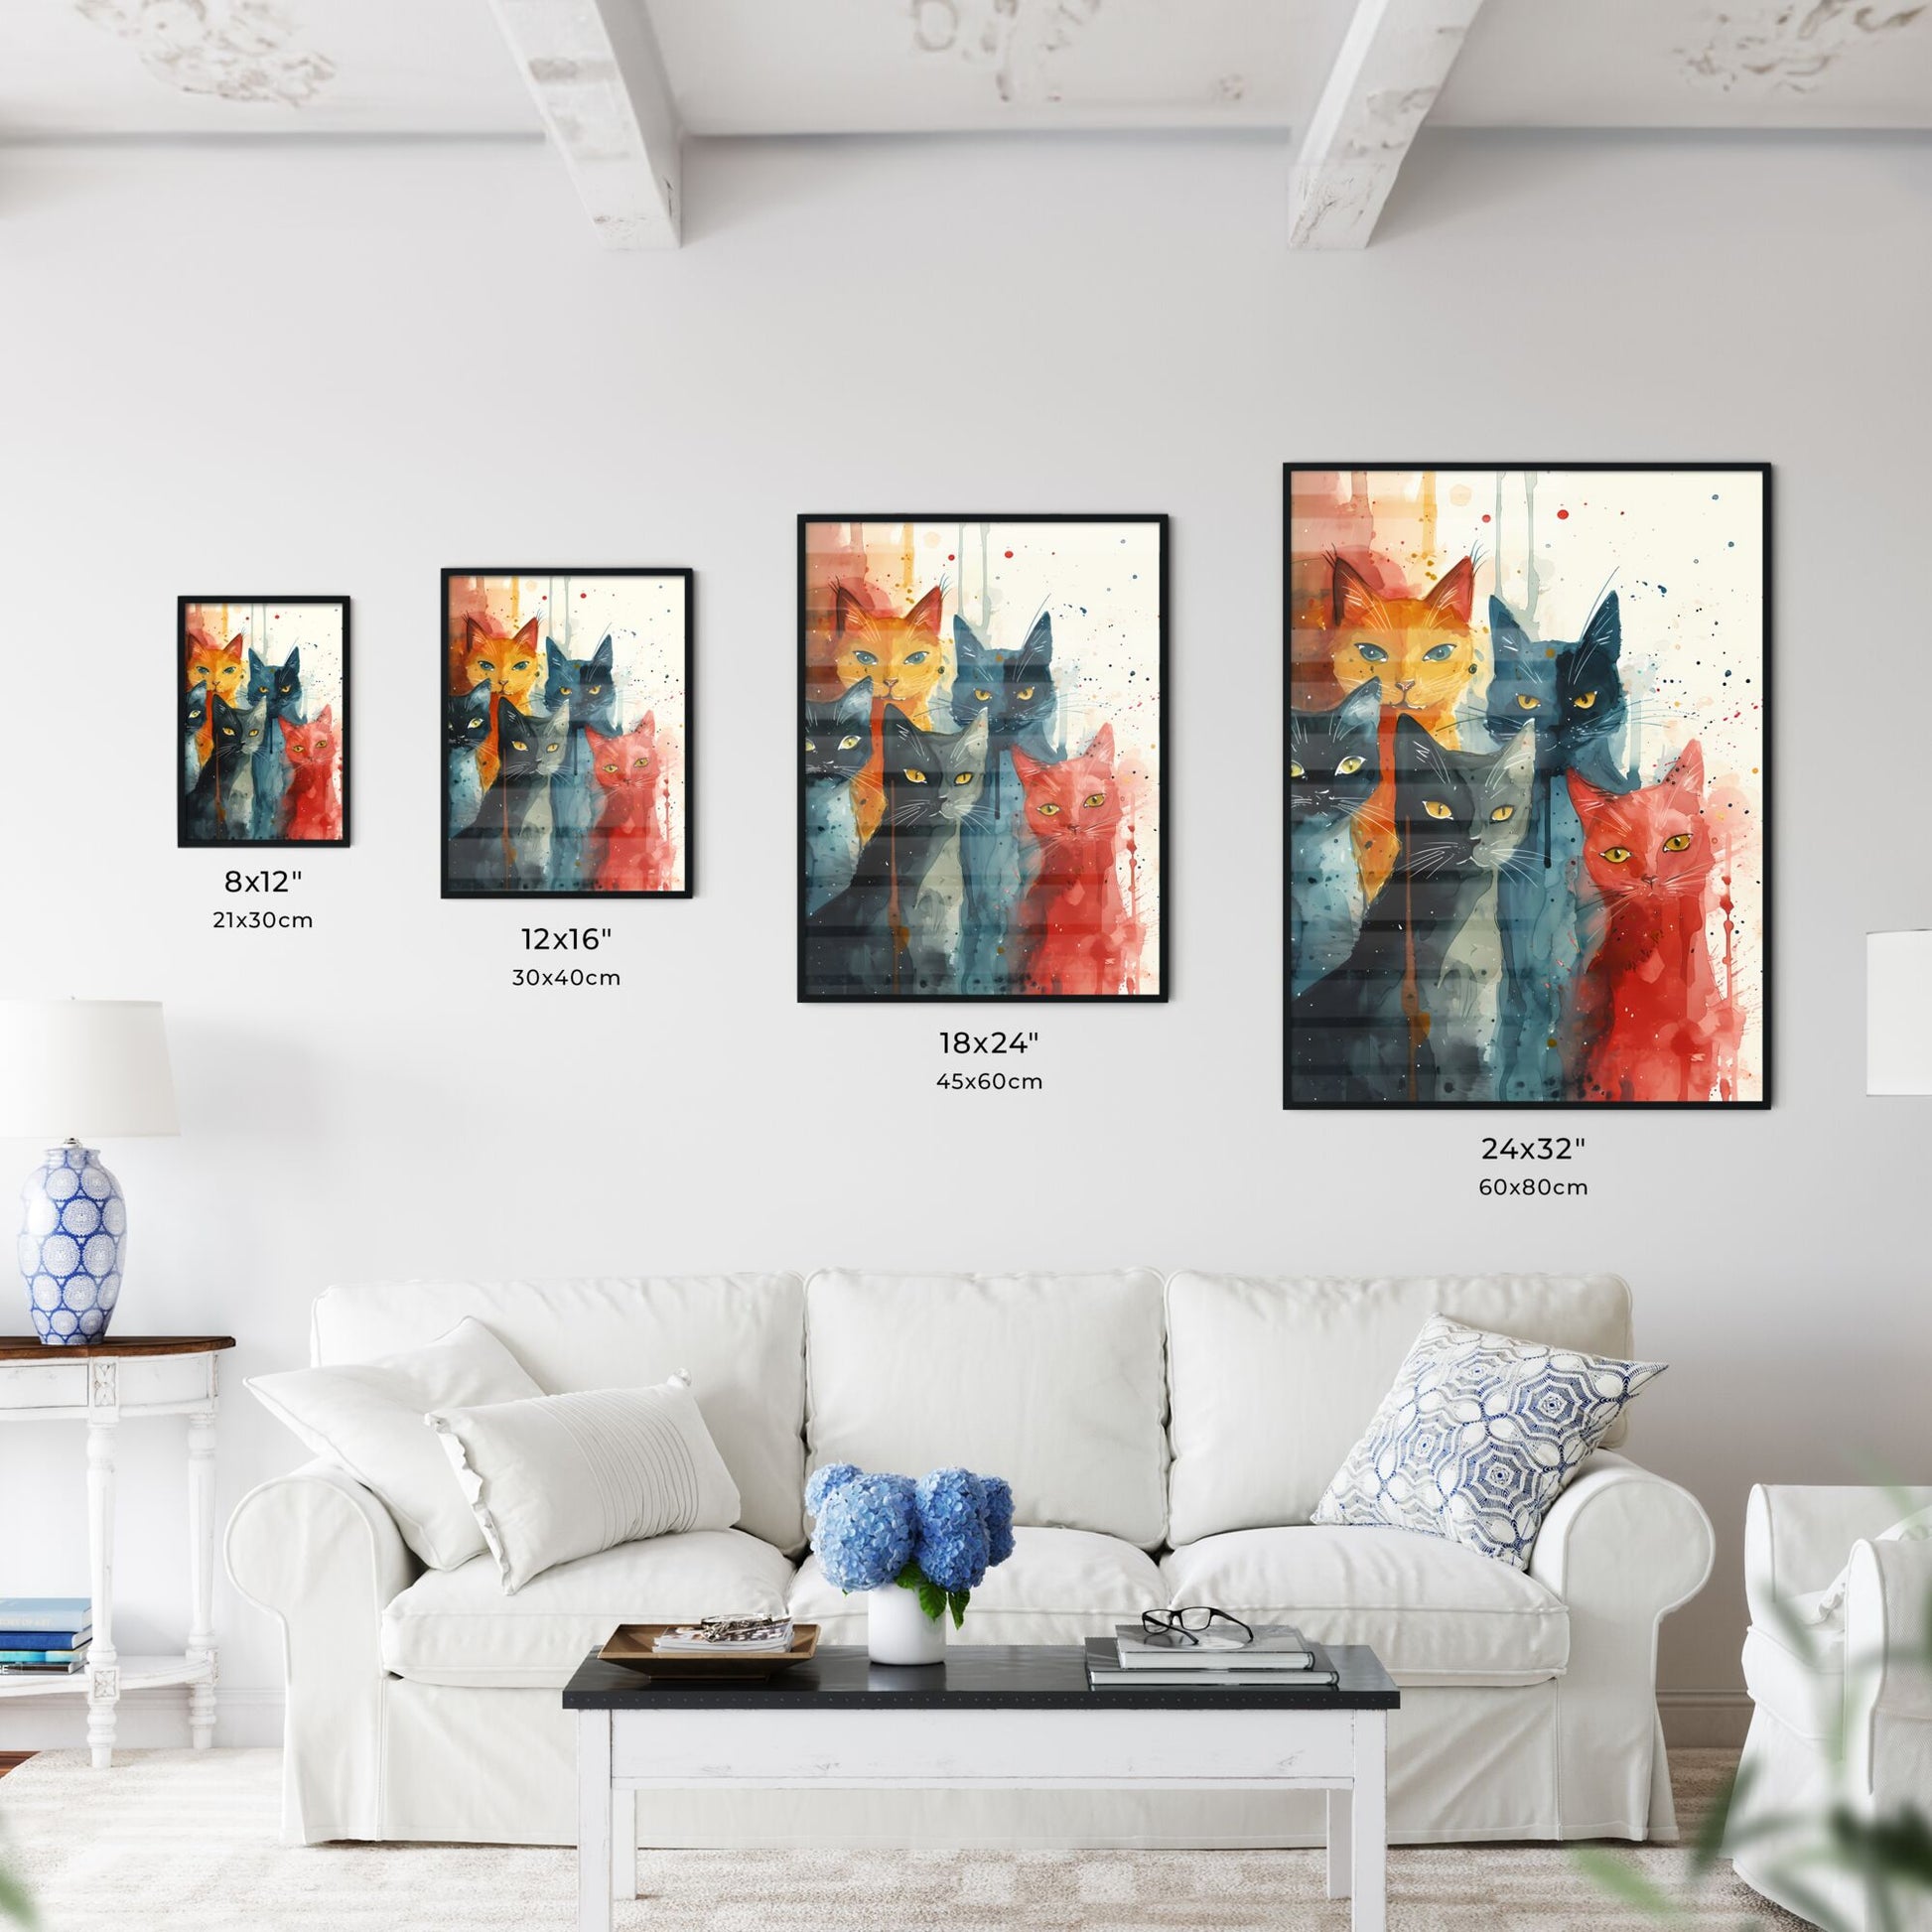 A Poster of cats eclectic squares on a white background - A Group Of Cats With Watercolor Paint Default Title